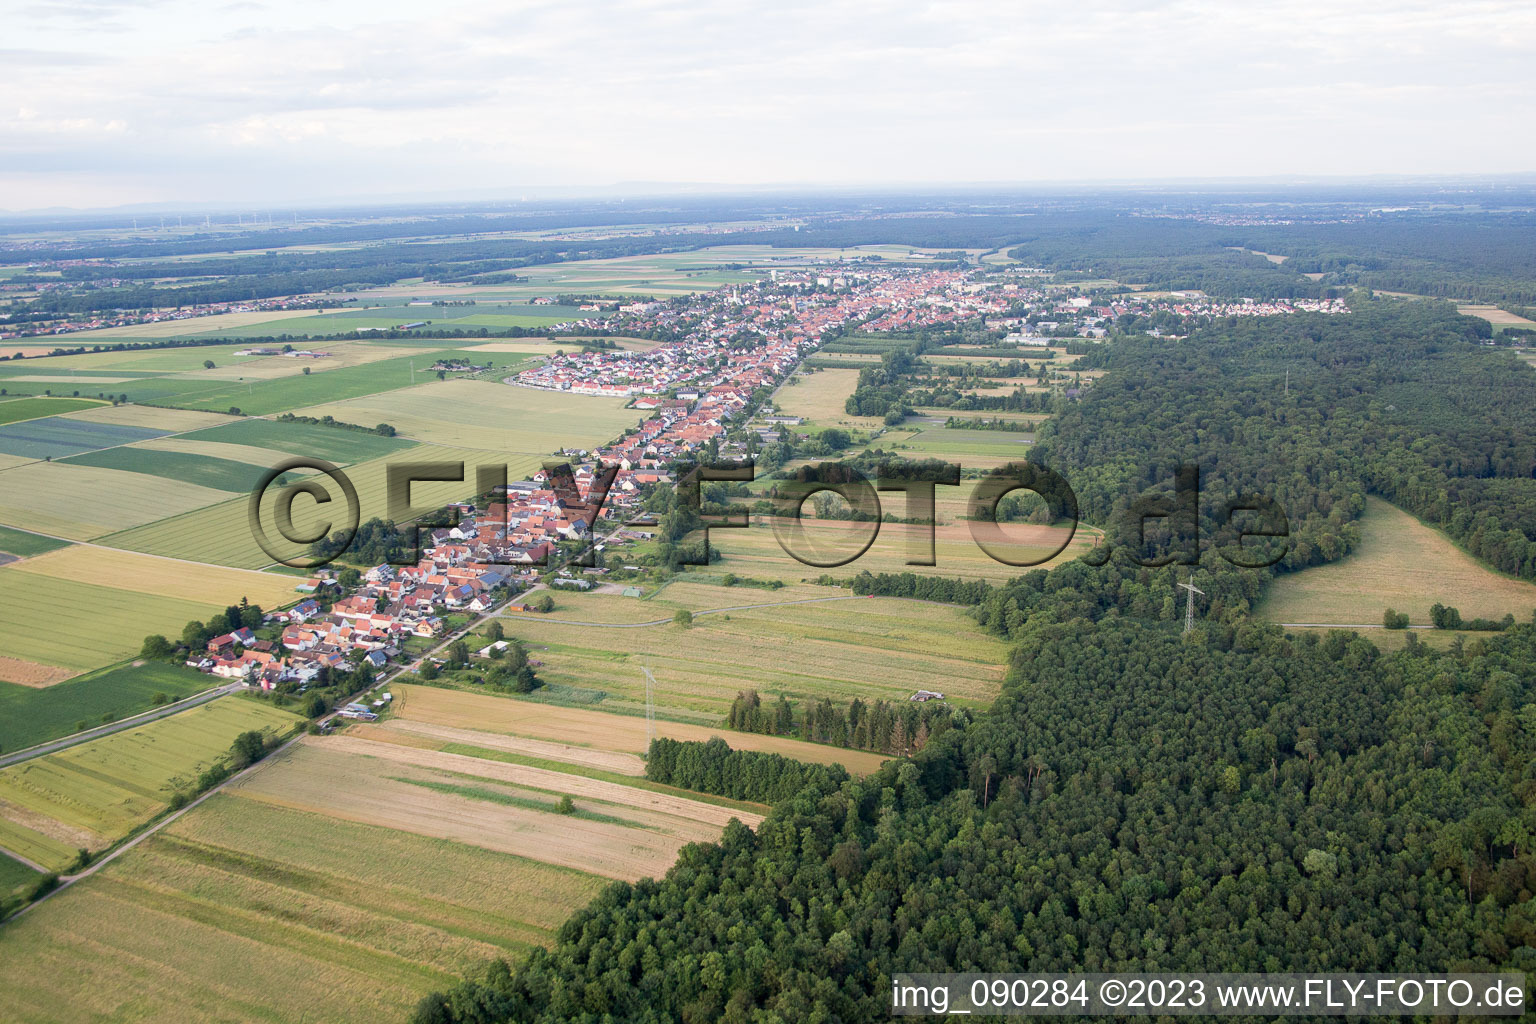 Saarstr in Kandel in the state Rhineland-Palatinate, Germany seen from a drone